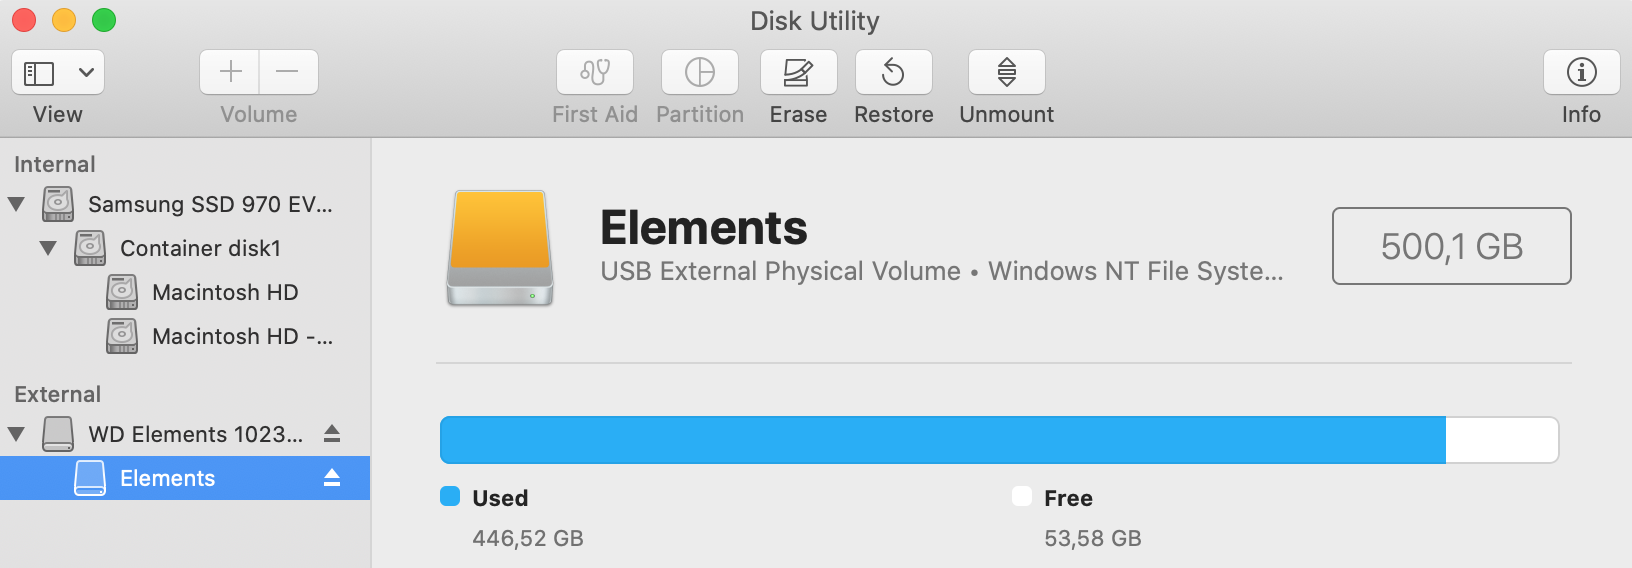 wd disk utility for mac